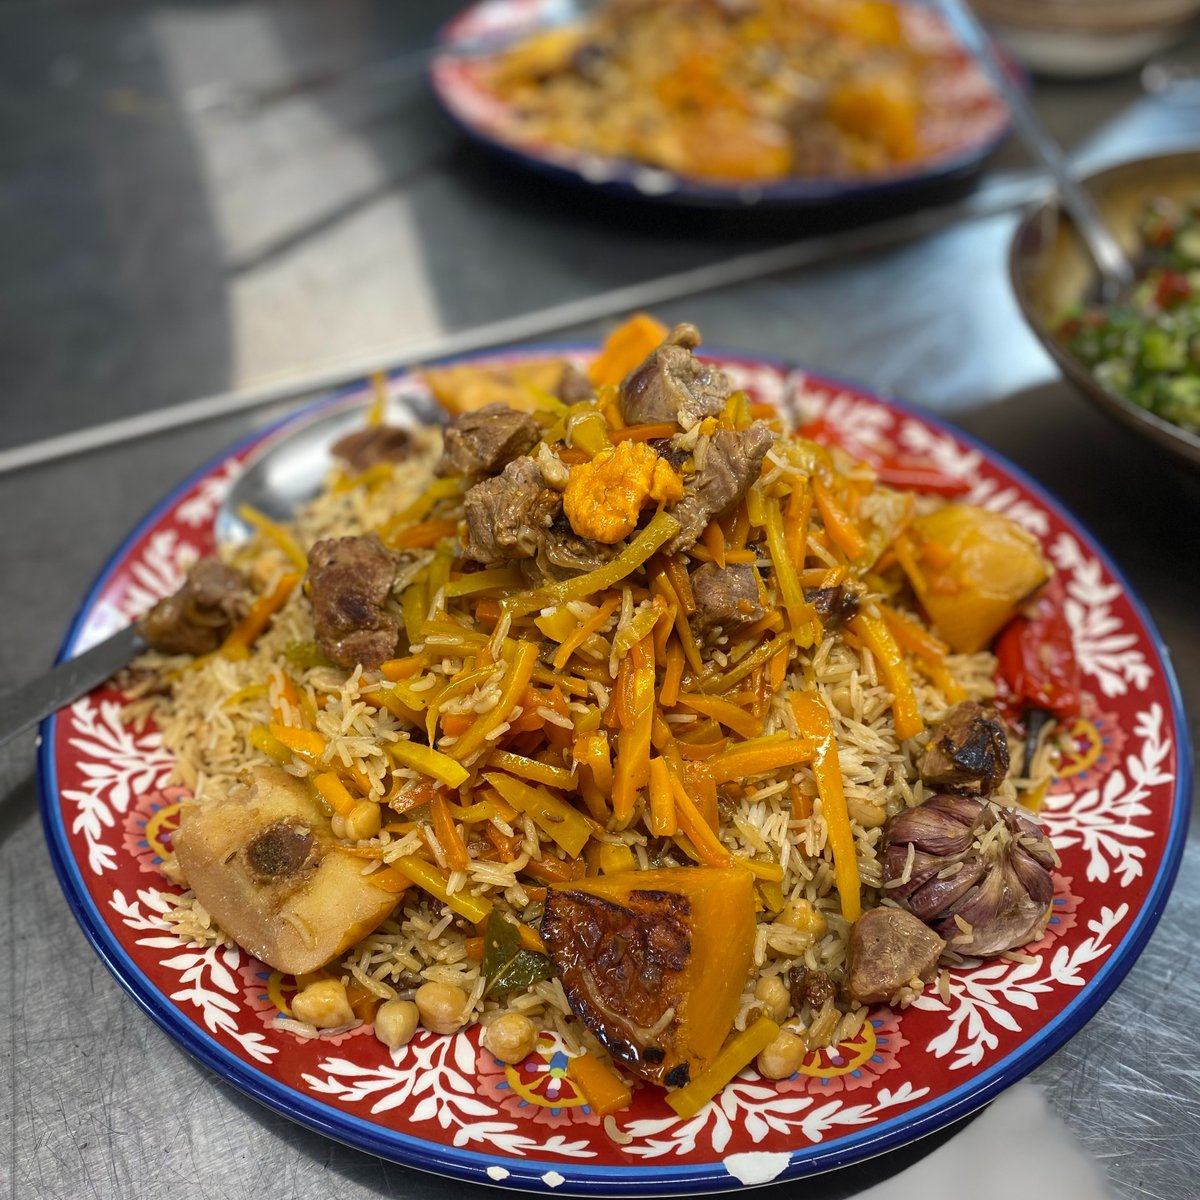 Today's #FoodieFriday is Sanobar’s Palav 🤩 There are over 200 kinds of Palav in Central Asia! This particular dish is a Samarkand version, and is cooked in layers. It usually consists of meat, root vegetables and rice, however, Sanobar makes hers vegetarian with chickpeas 🤤